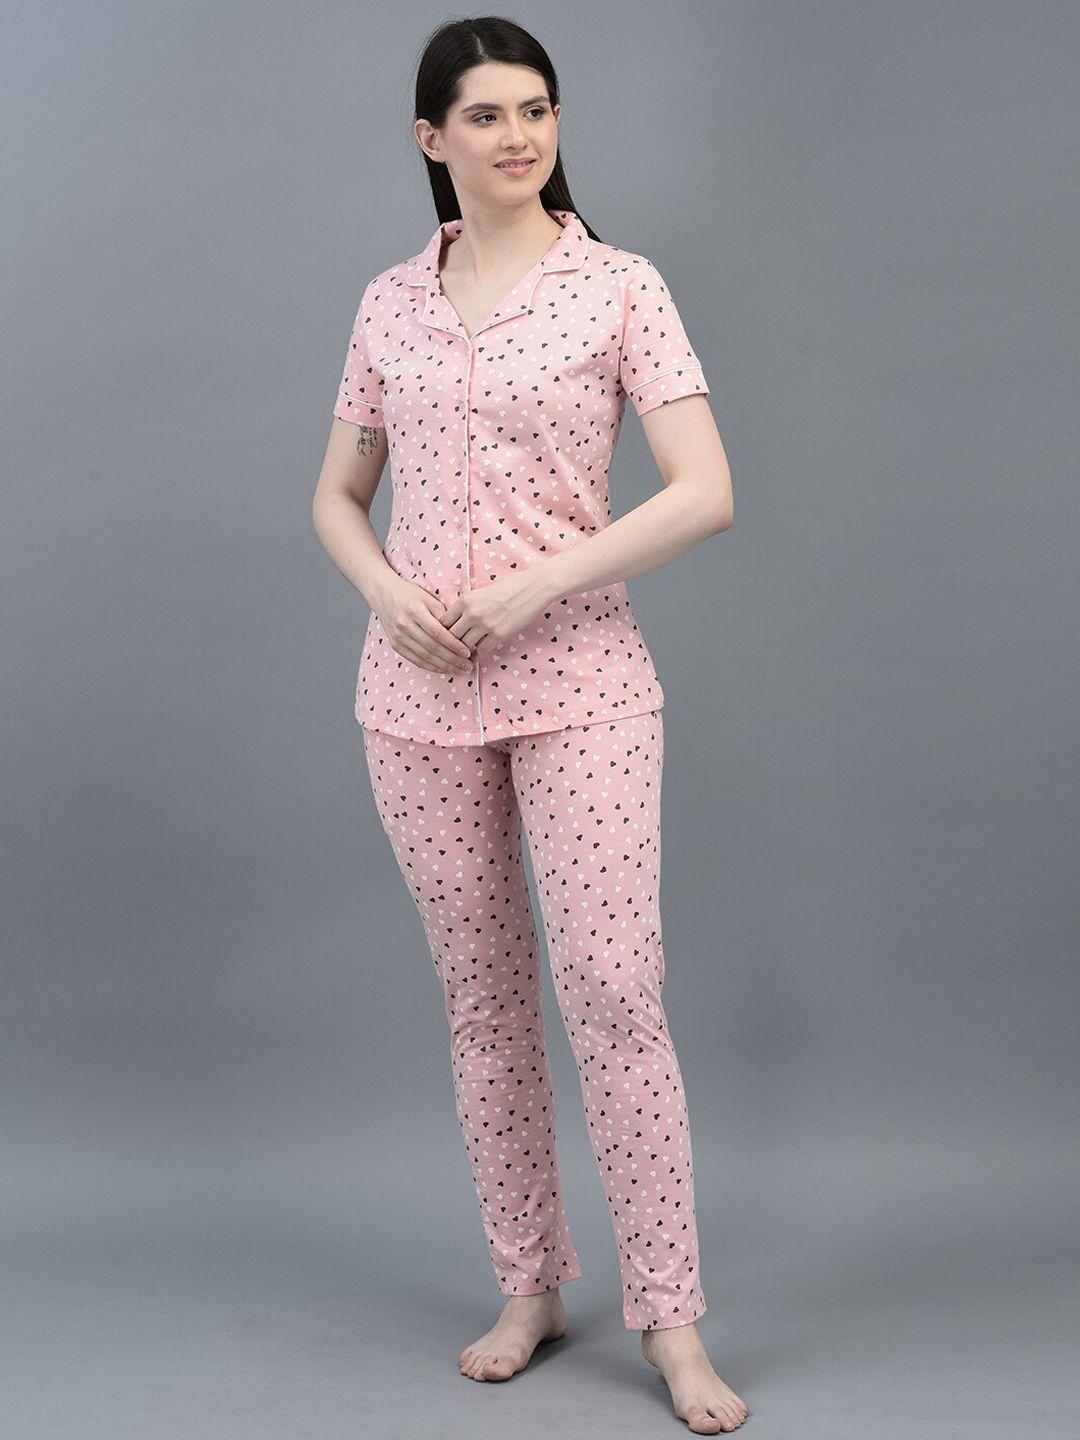 dollar missy conversational printed pure cotton night suit